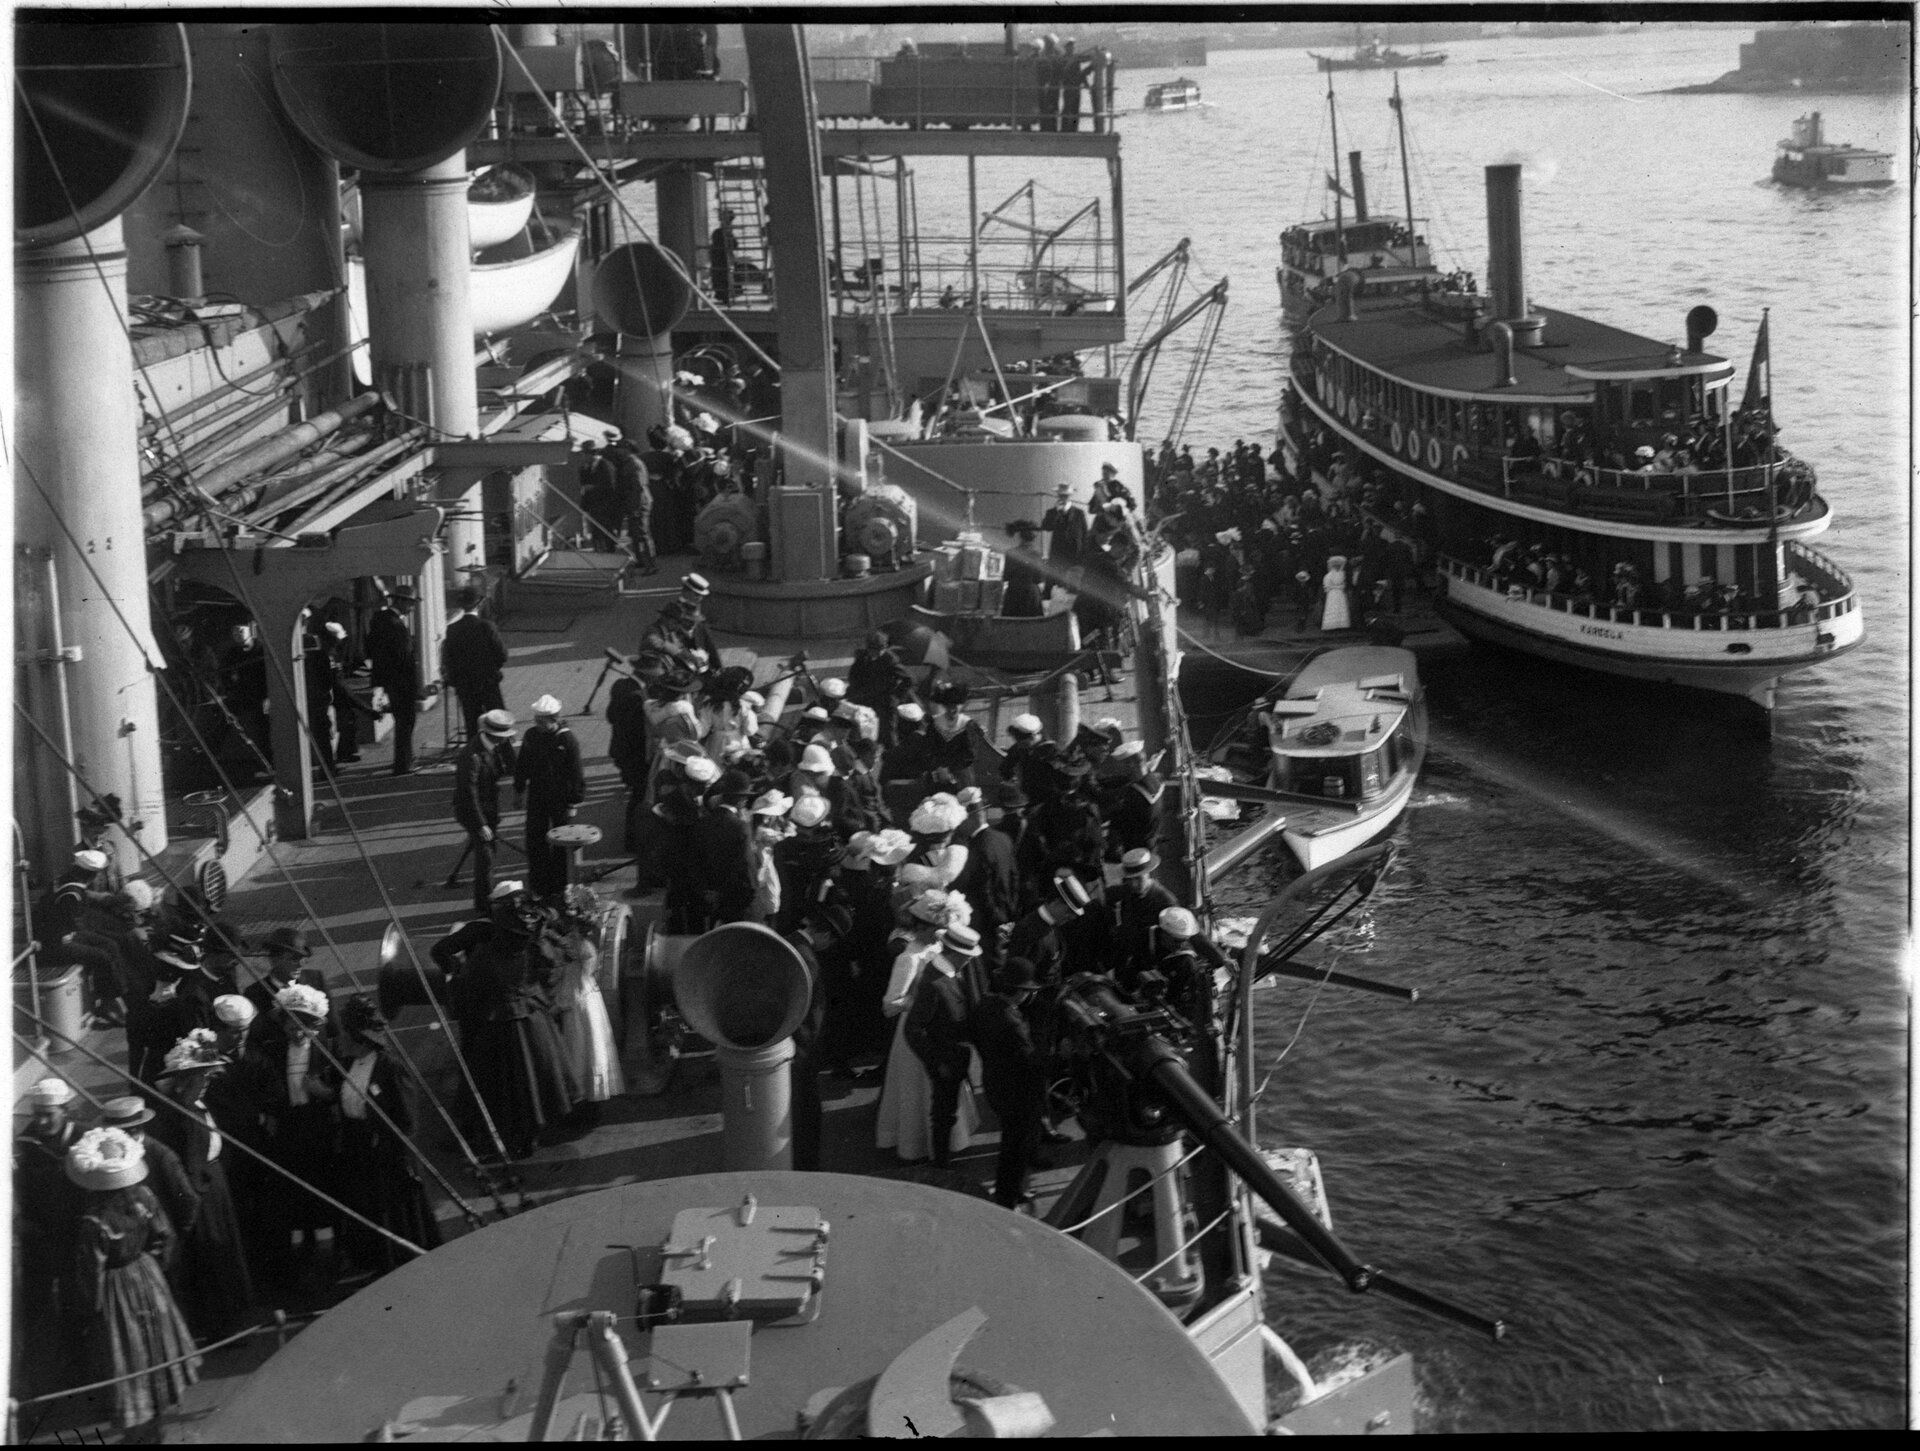  Crowds of visitors fill the deck of a ship. More visitors arrive from a launch vessel in the background